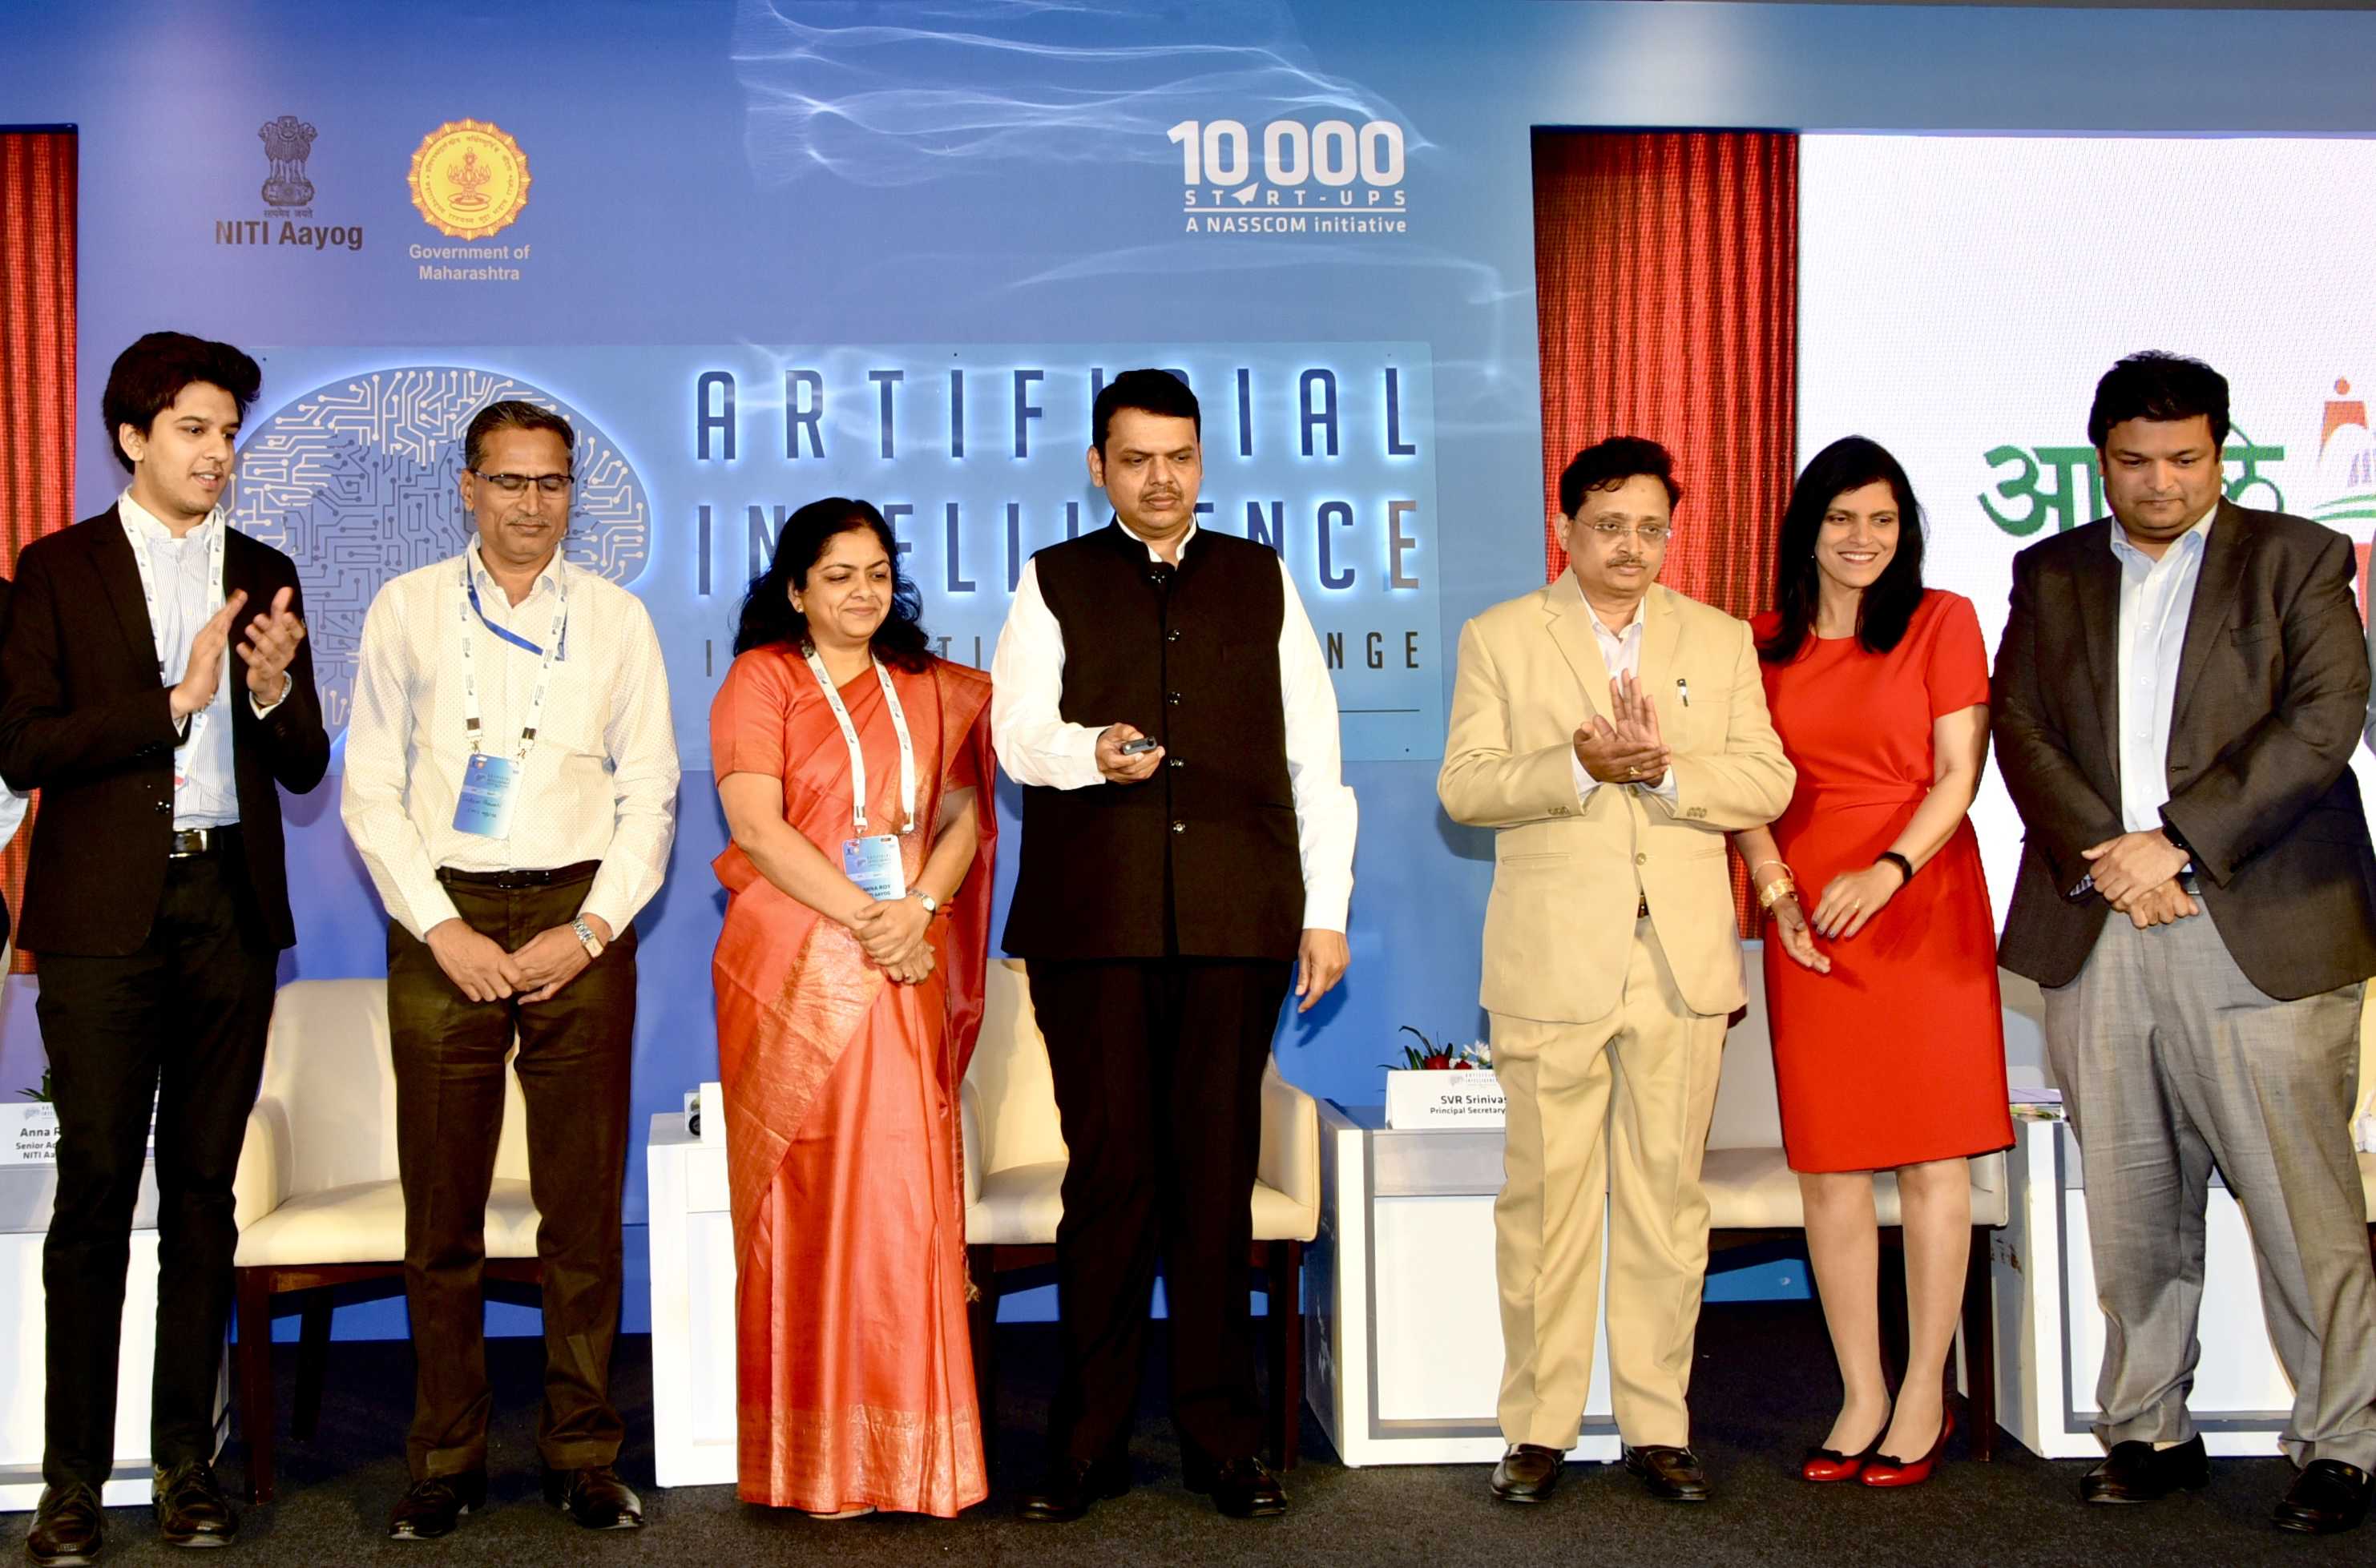 Chief Minister Devendra Fadnavis lays down his AI vision as 40 startups showcase their AI solutions for social good at AI Innovation Challenge 2019